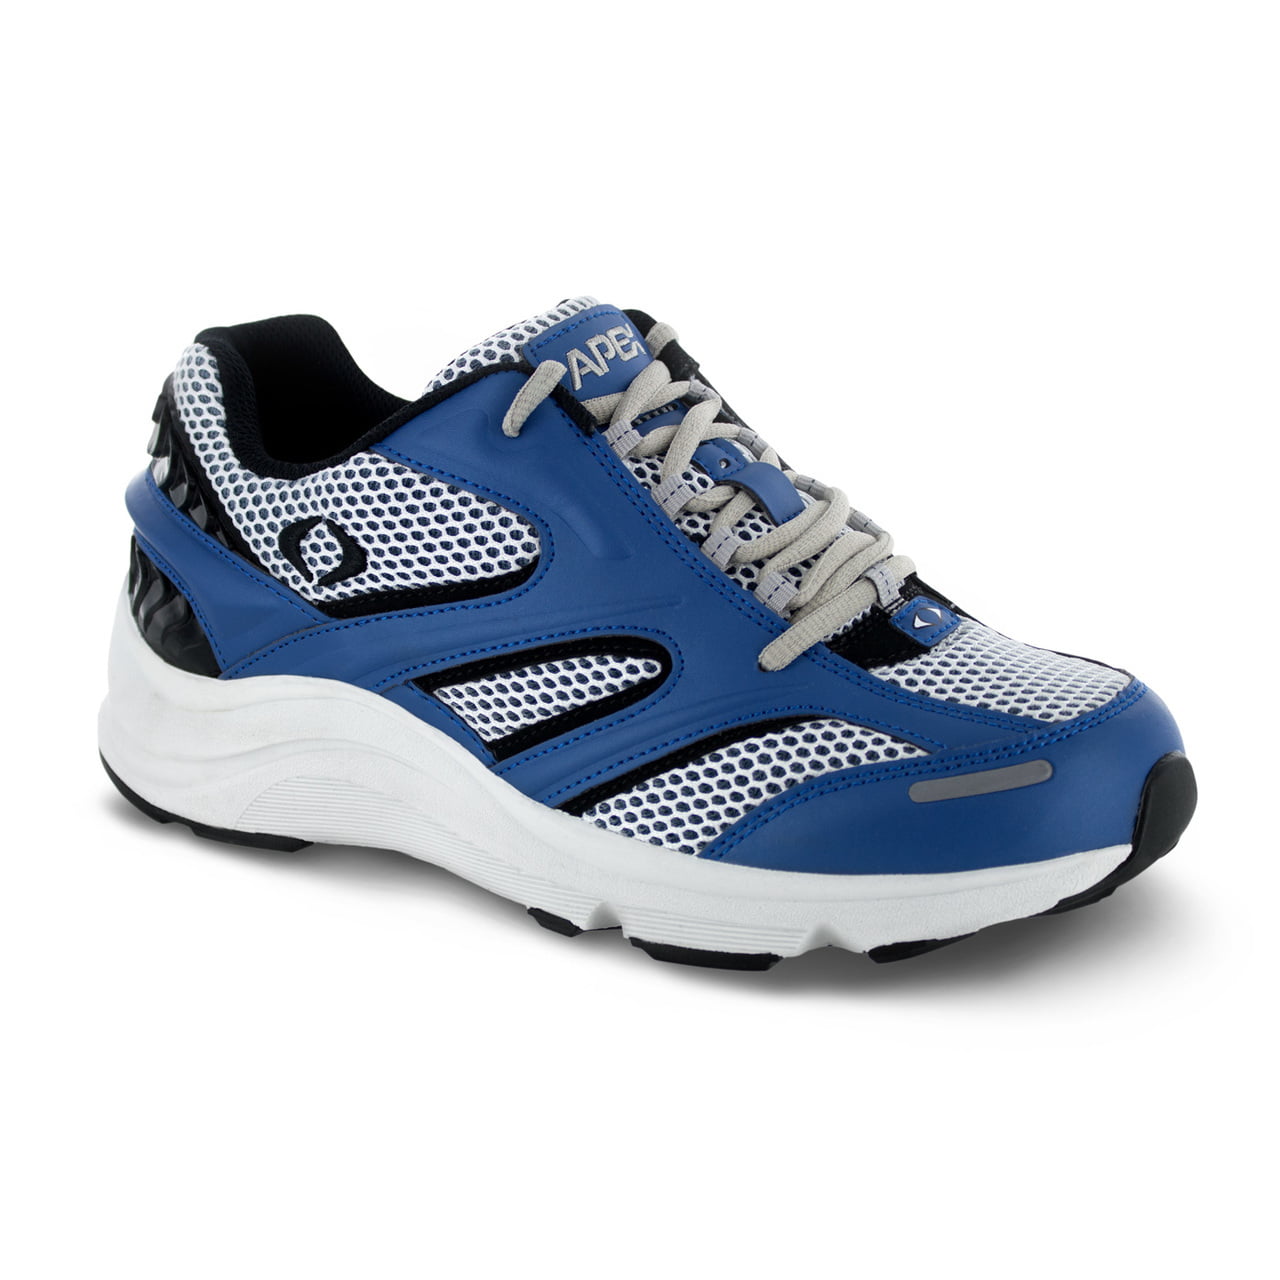 Men's Stealth Runner V Last Walking and Running Shoes - constructed ...